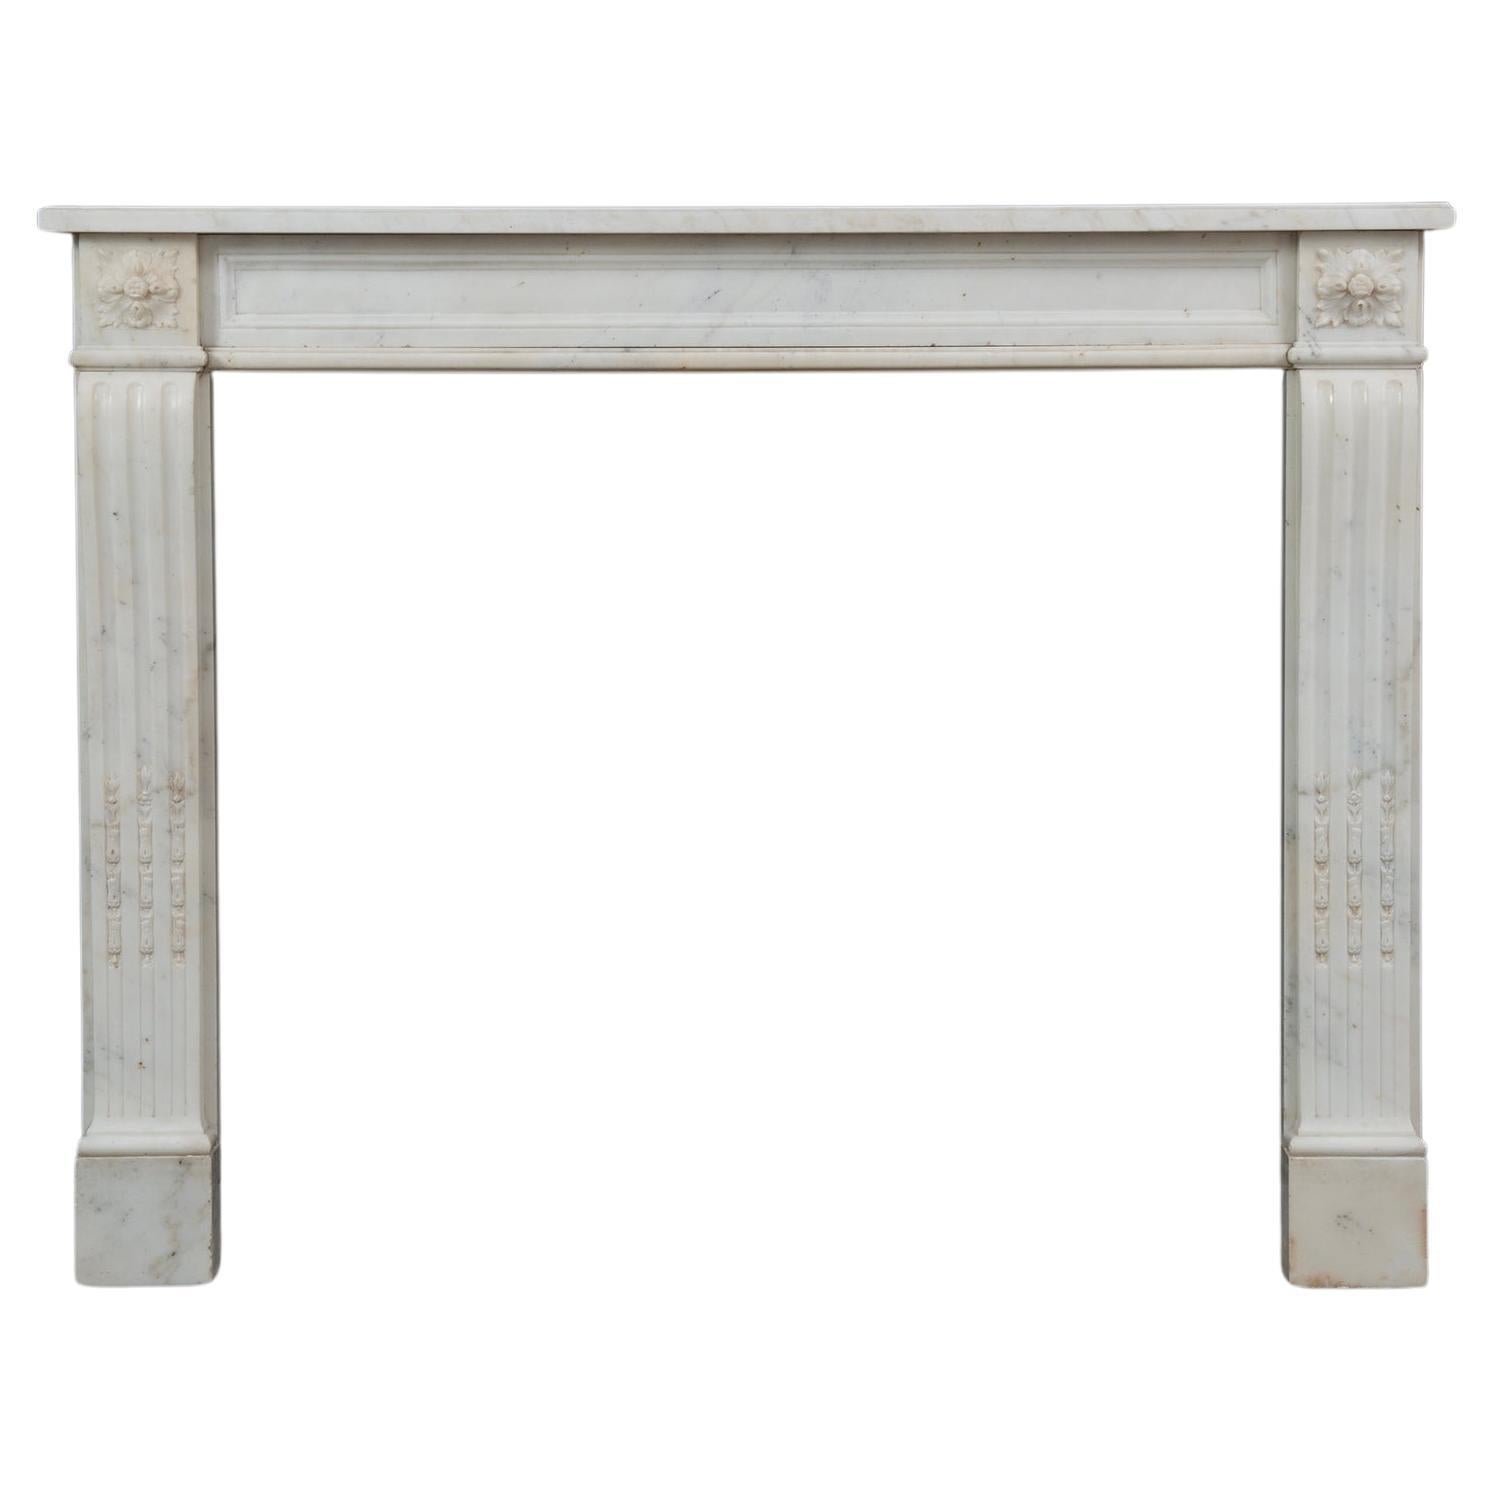 Delightful French Louis XVI Style Fireplace Mantel For Sale